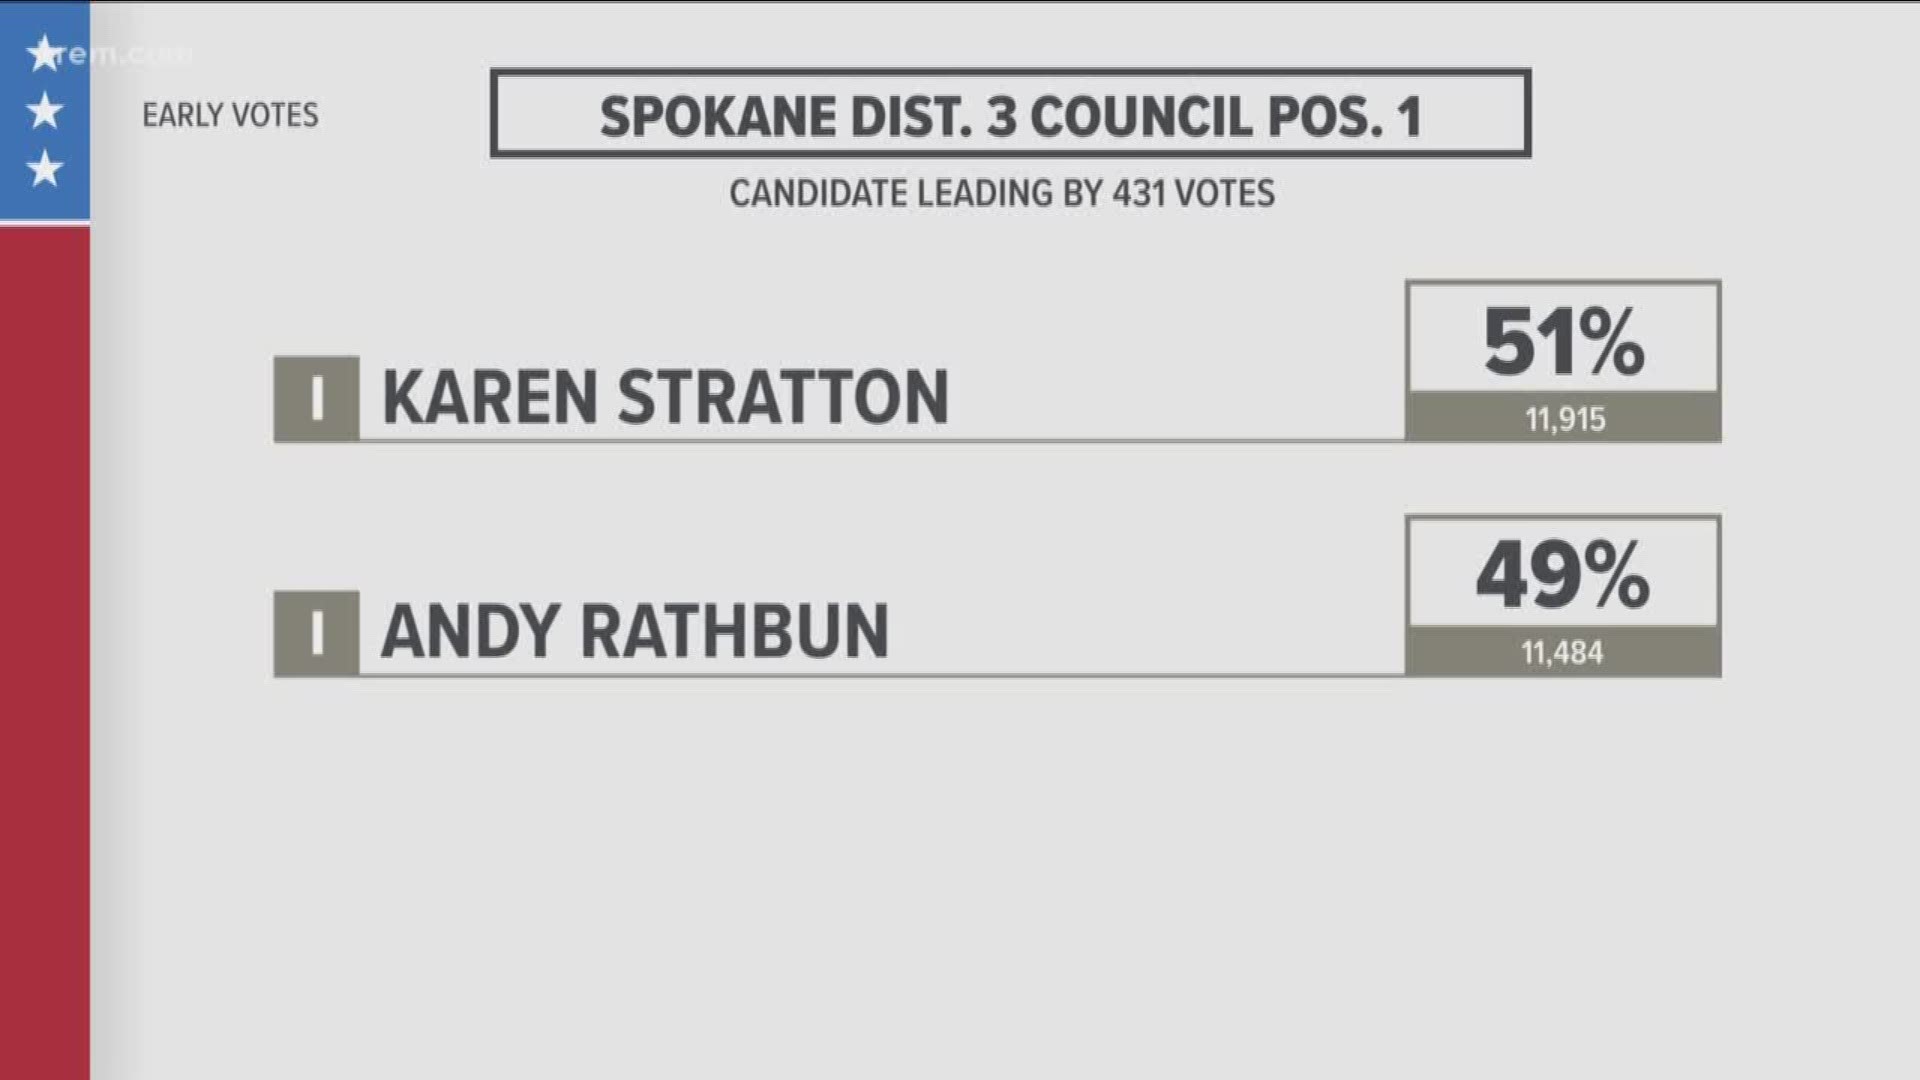 Andy Rathbun conceded to Karen Stratton in the District 3 race after trailing her by 431 votes after the final scheduled ballot count.